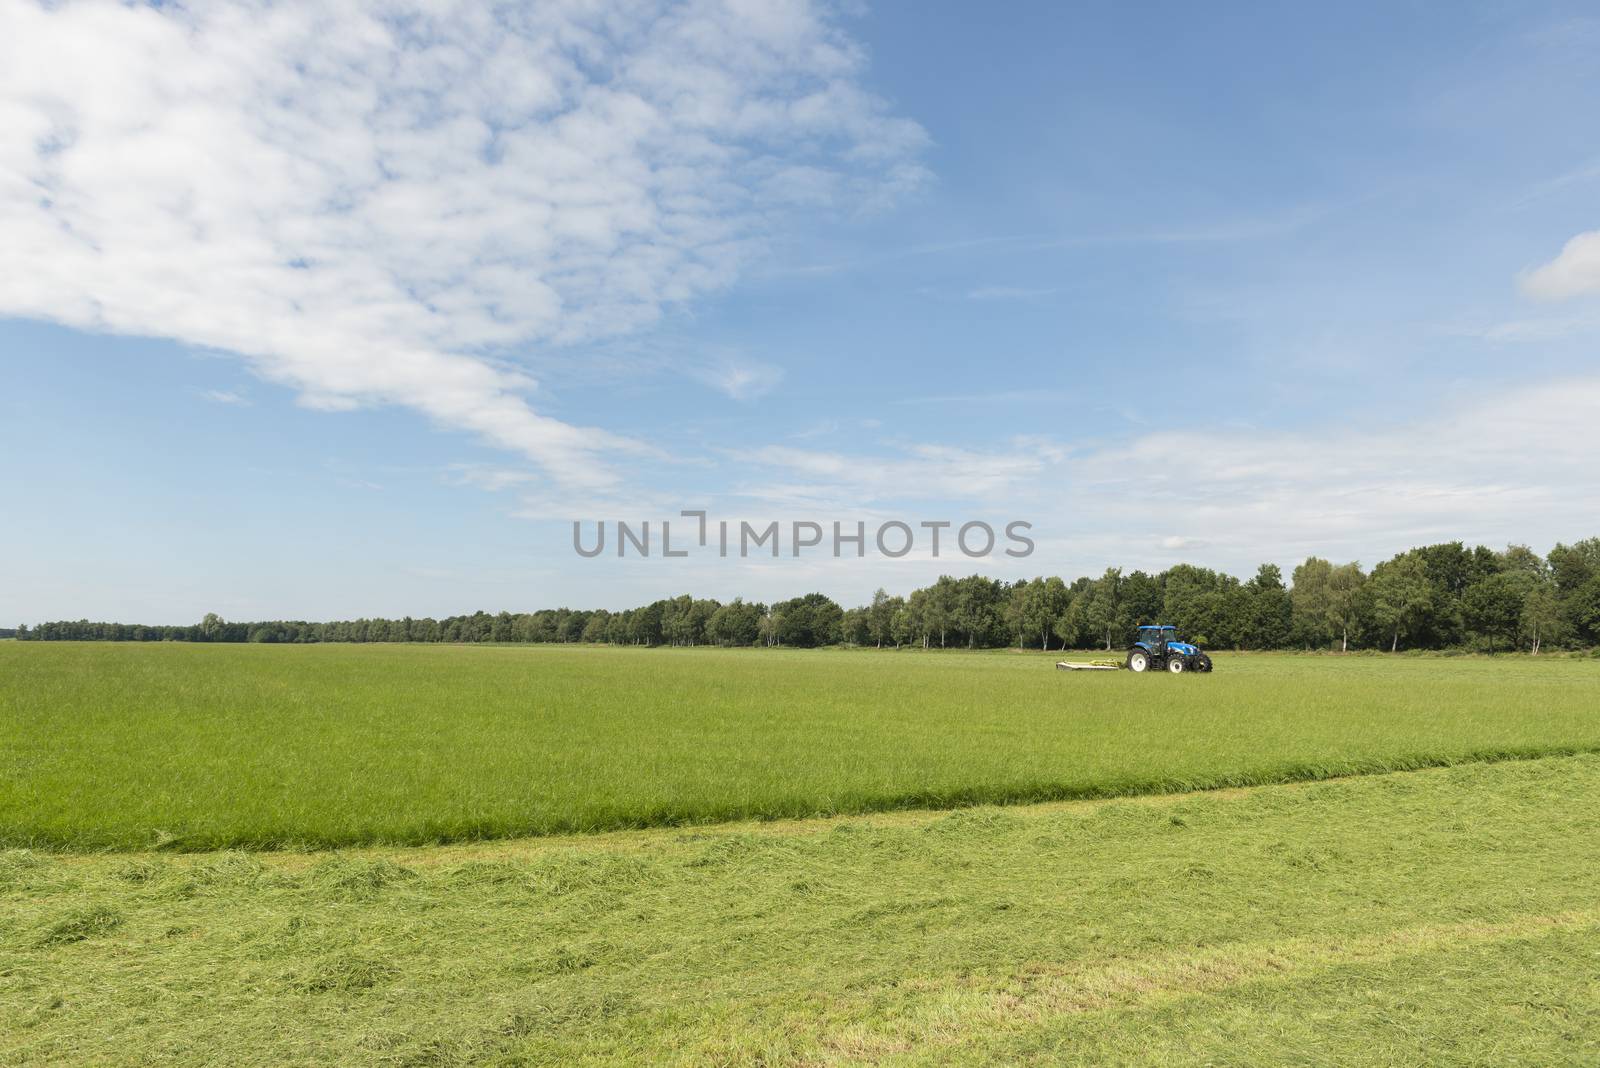 pasture mowing with blue tractor and mower by Tofotografie